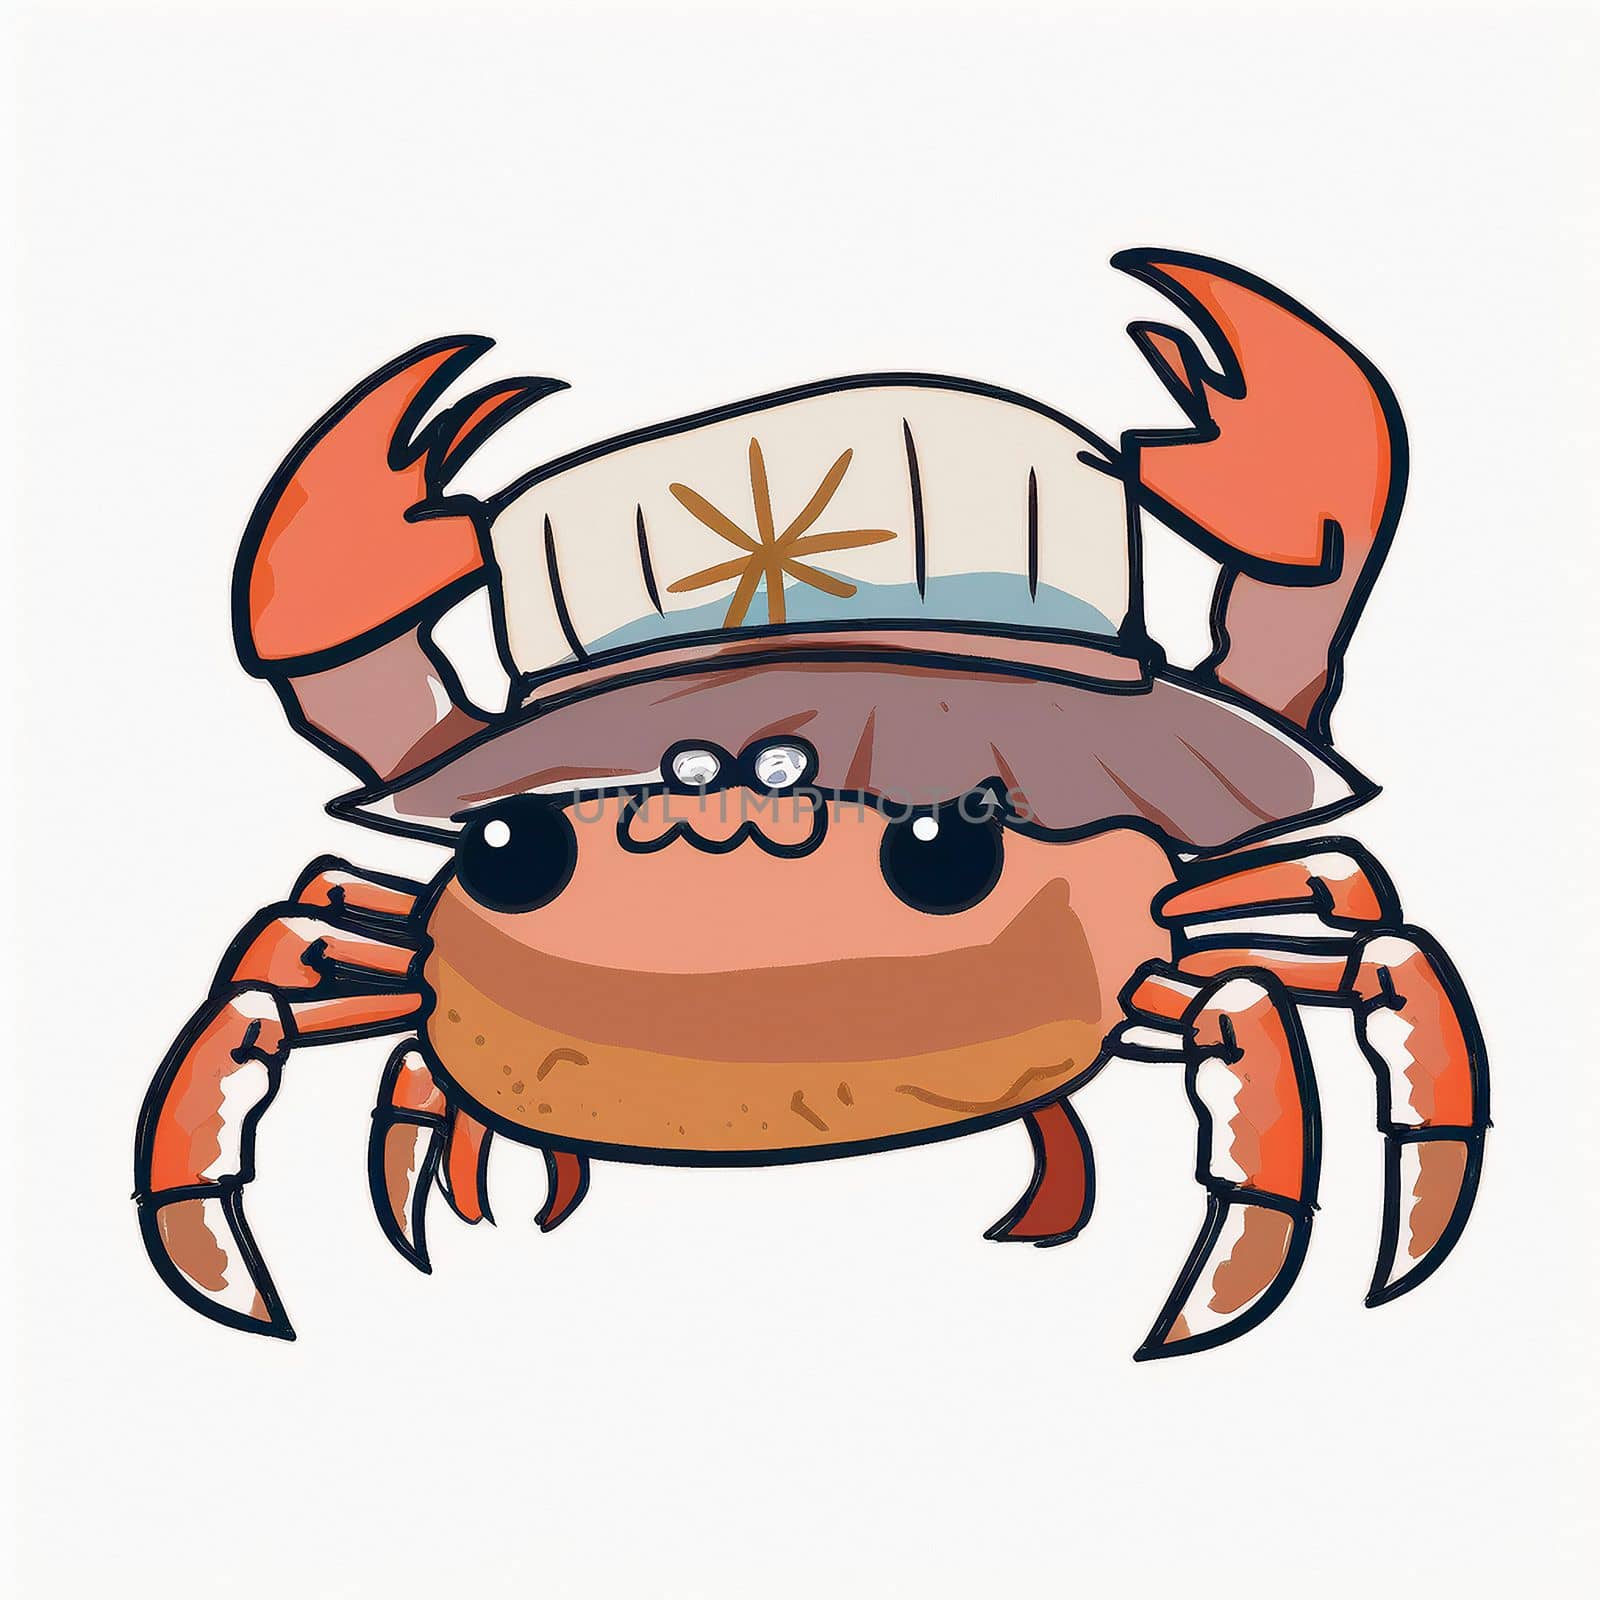 Crab in a hat by NeuroSky